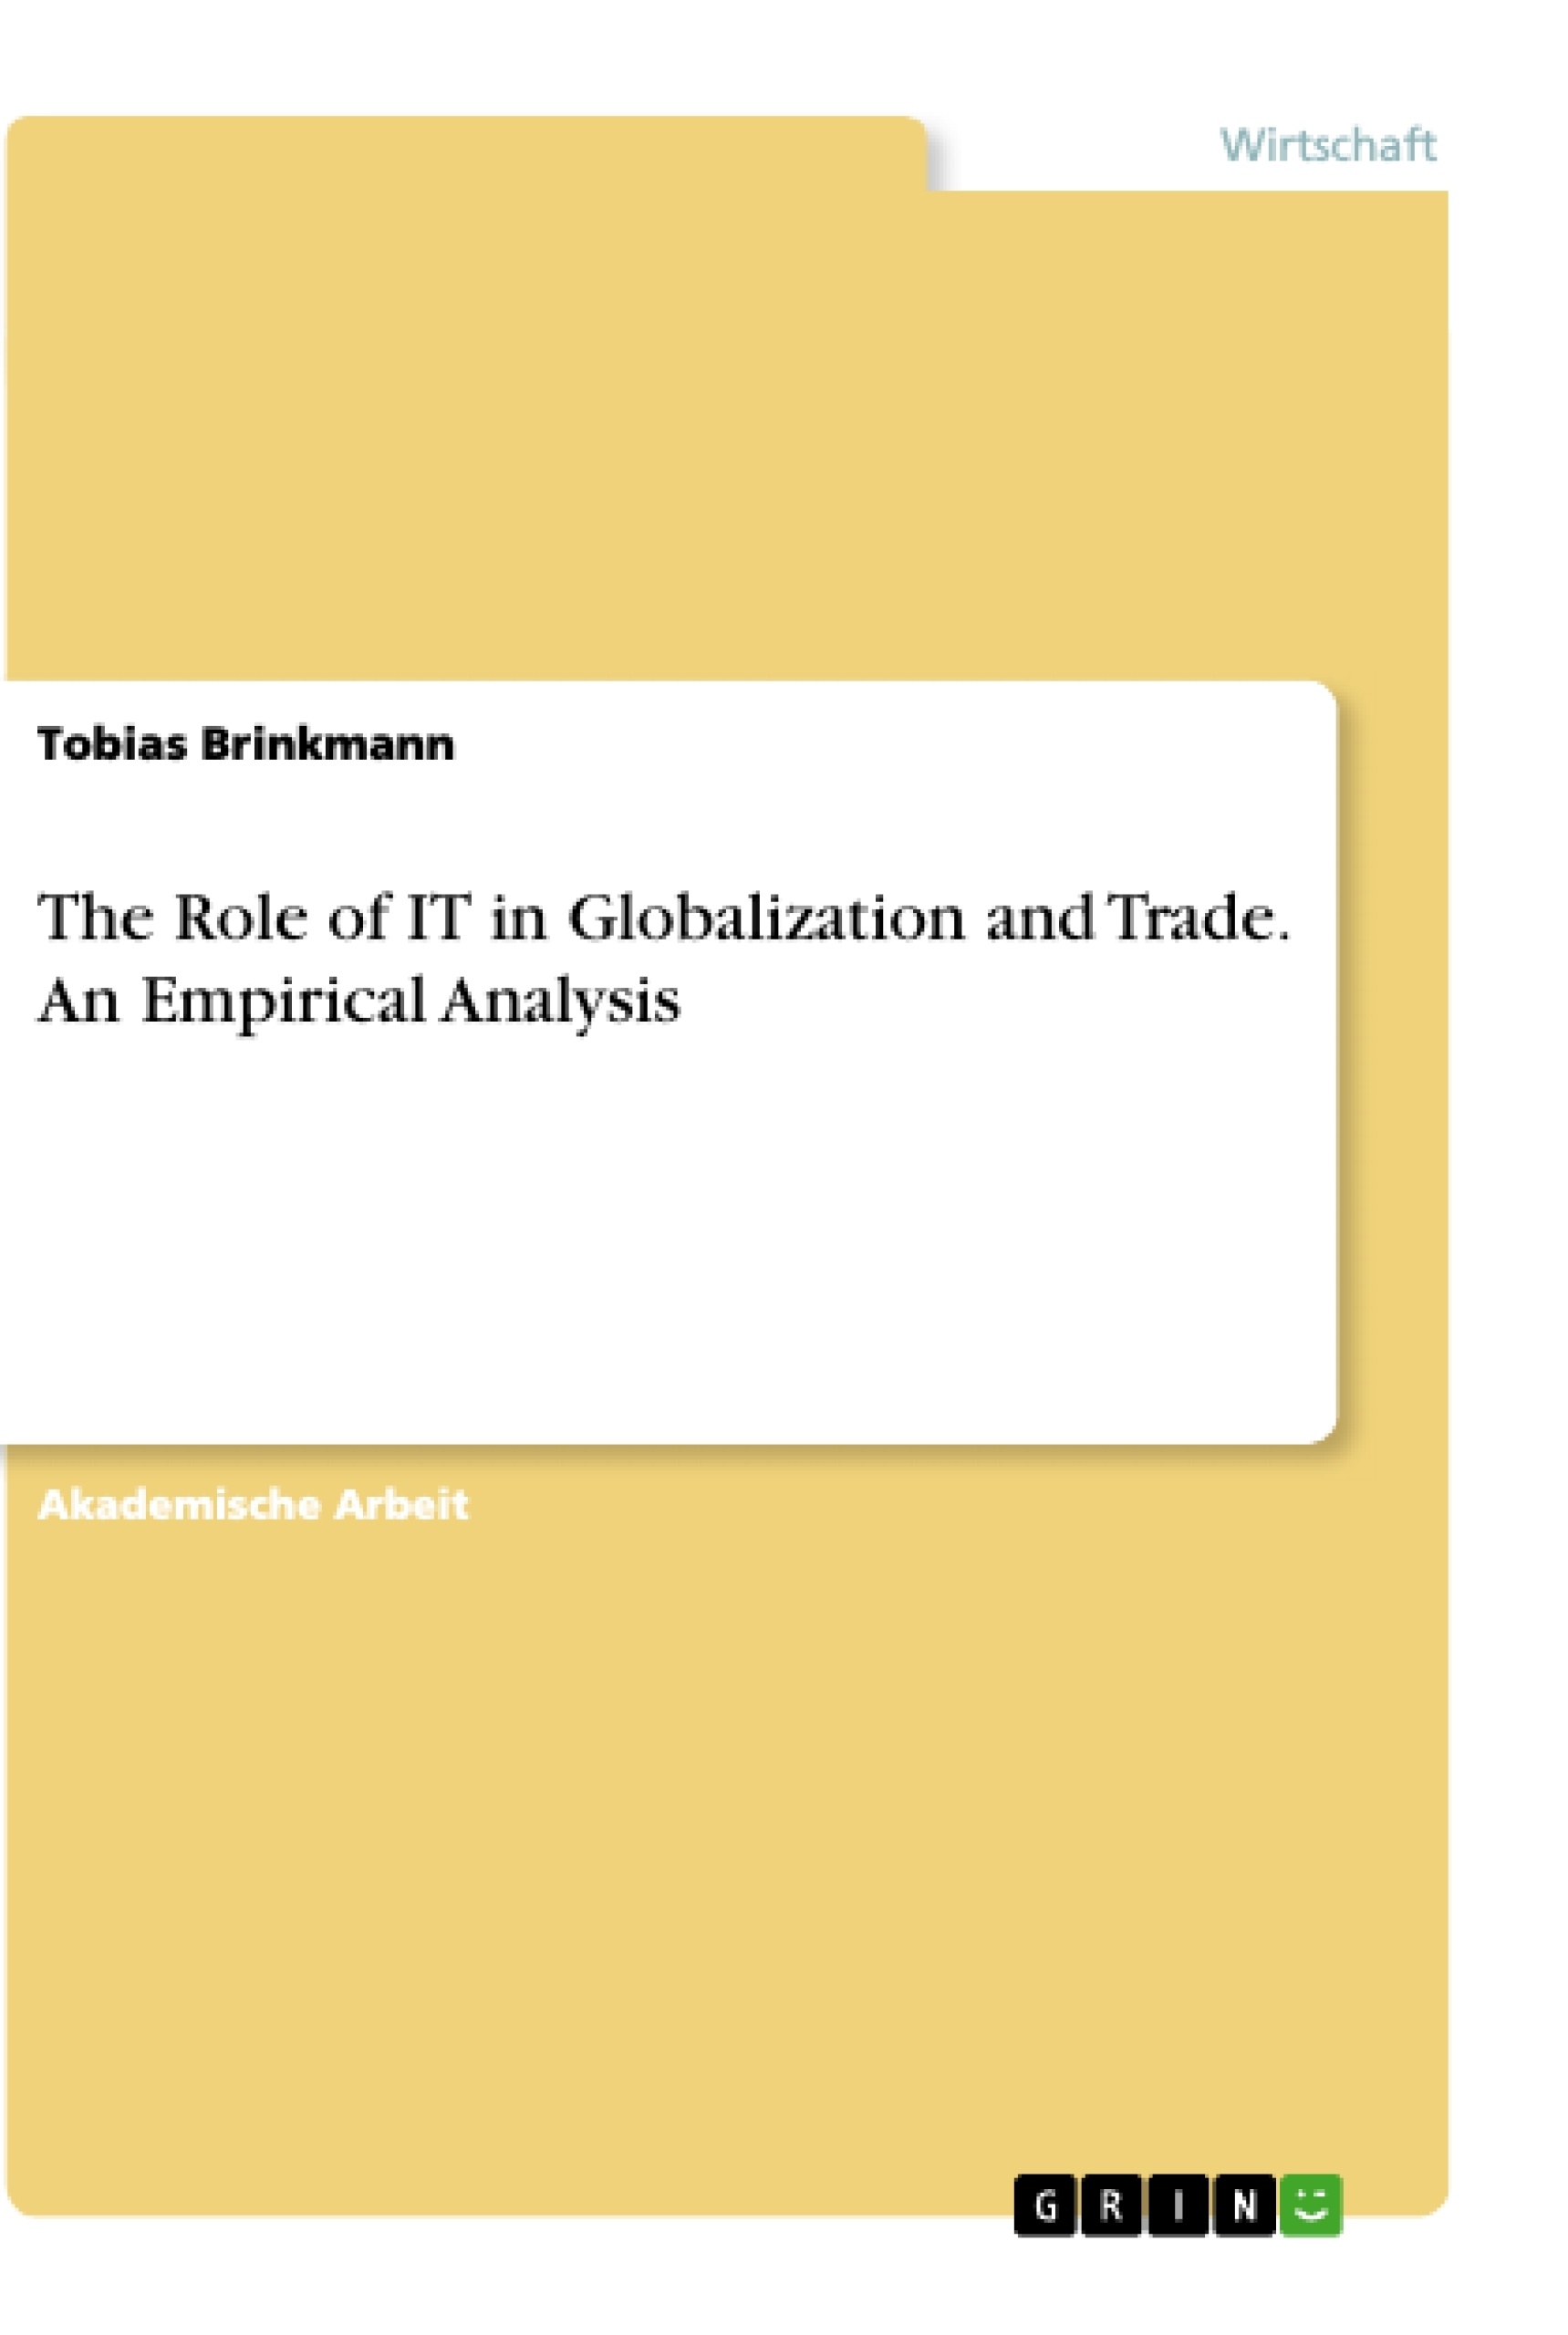 Titel: The Role of IT in Globalization and Trade. An Empirical Analysis